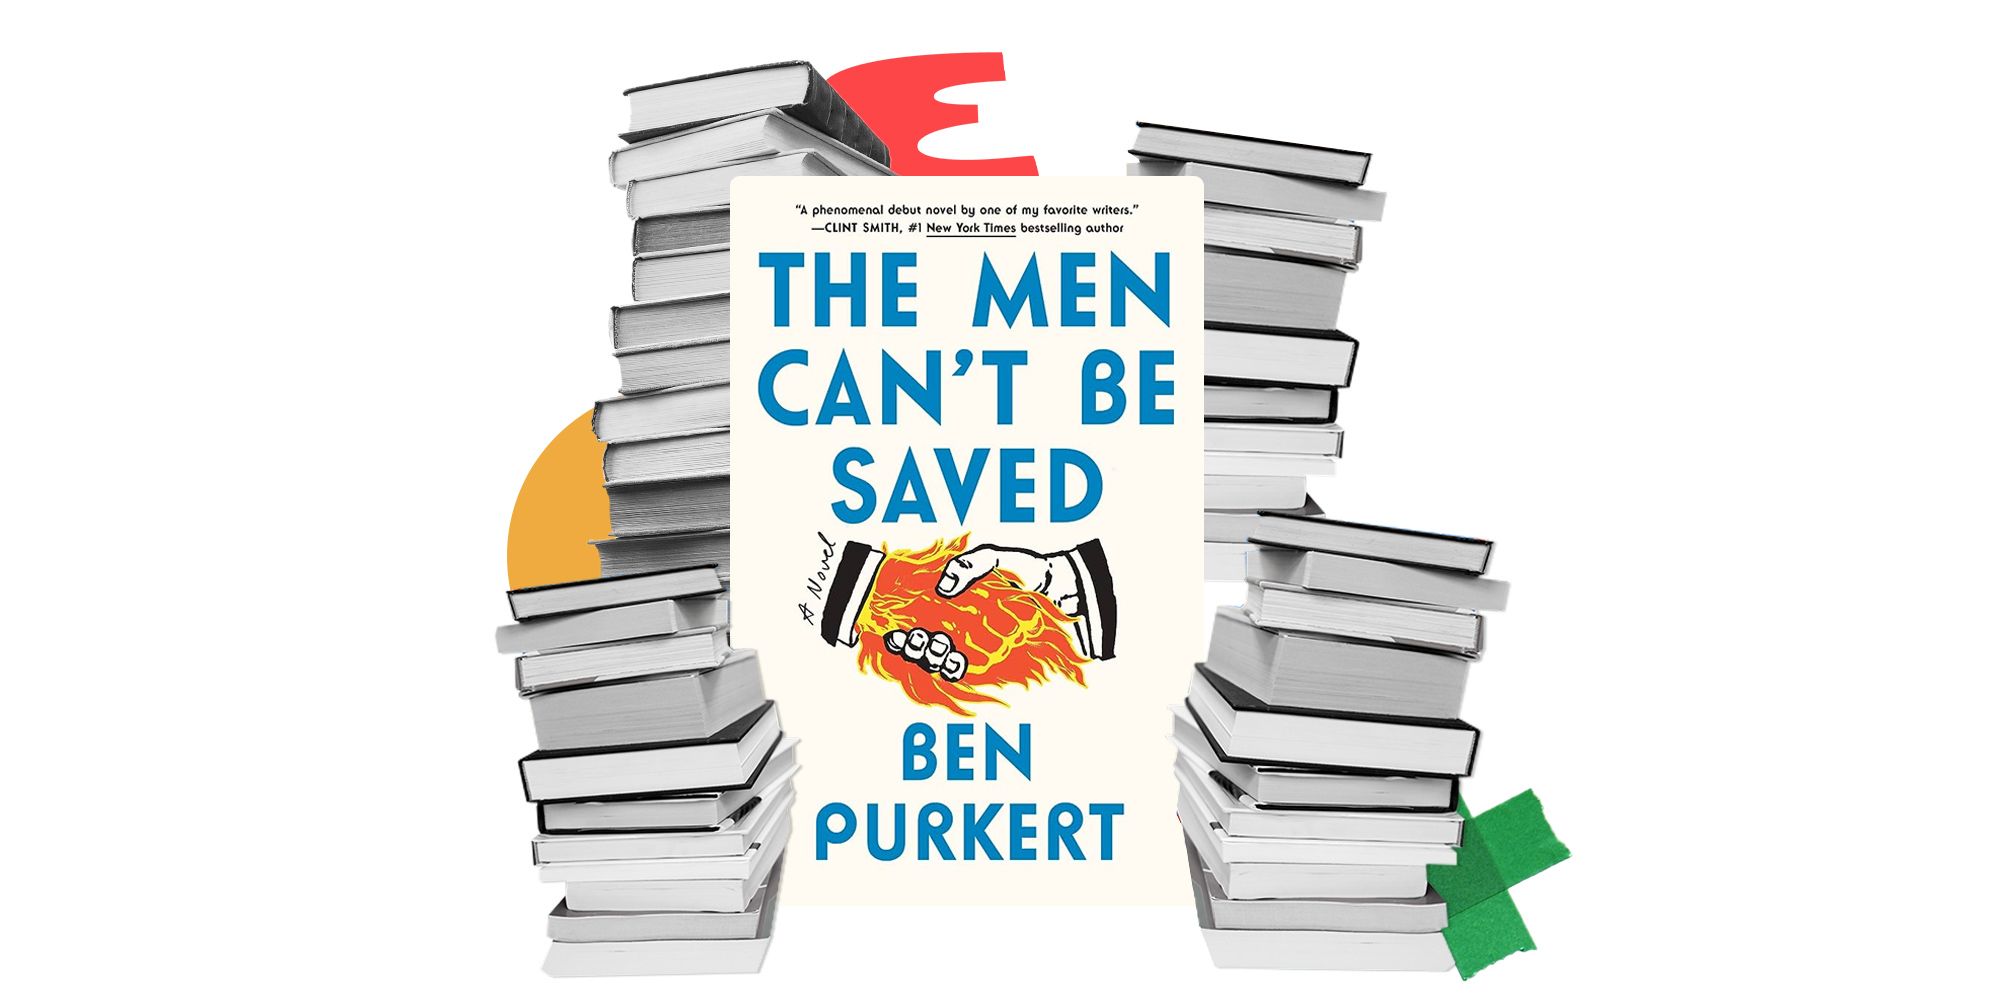 Ben Purkert on The Men Cant Be Saved and Real Life Inspiration pic